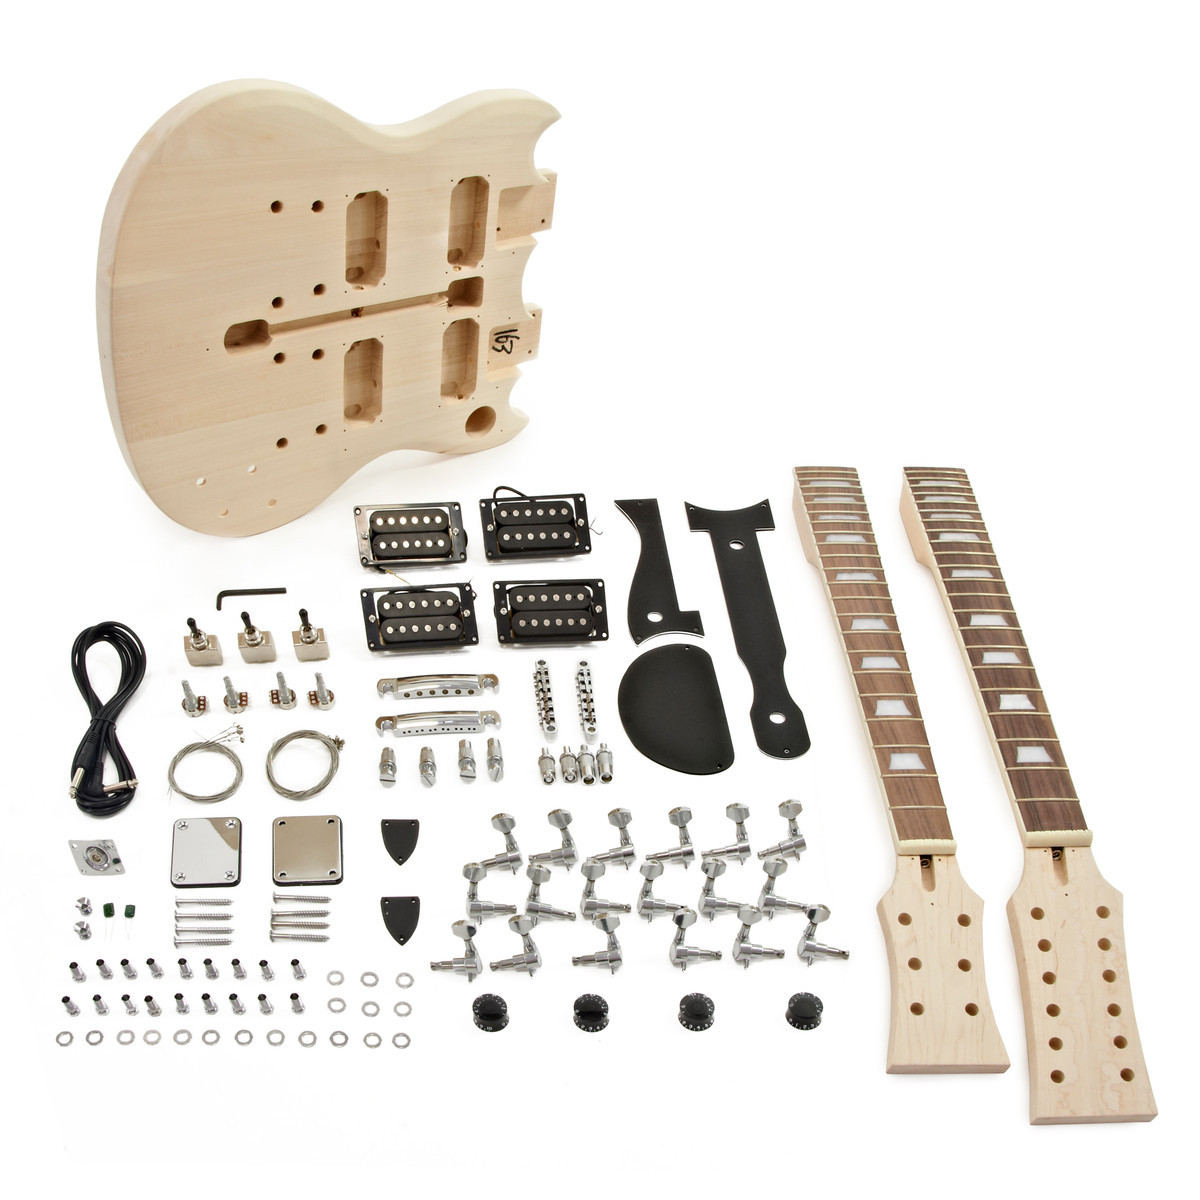 DIY Double Neck Guitar Kit
 Brooklyn Double Neck Guitar DIY Kit Nearly New at